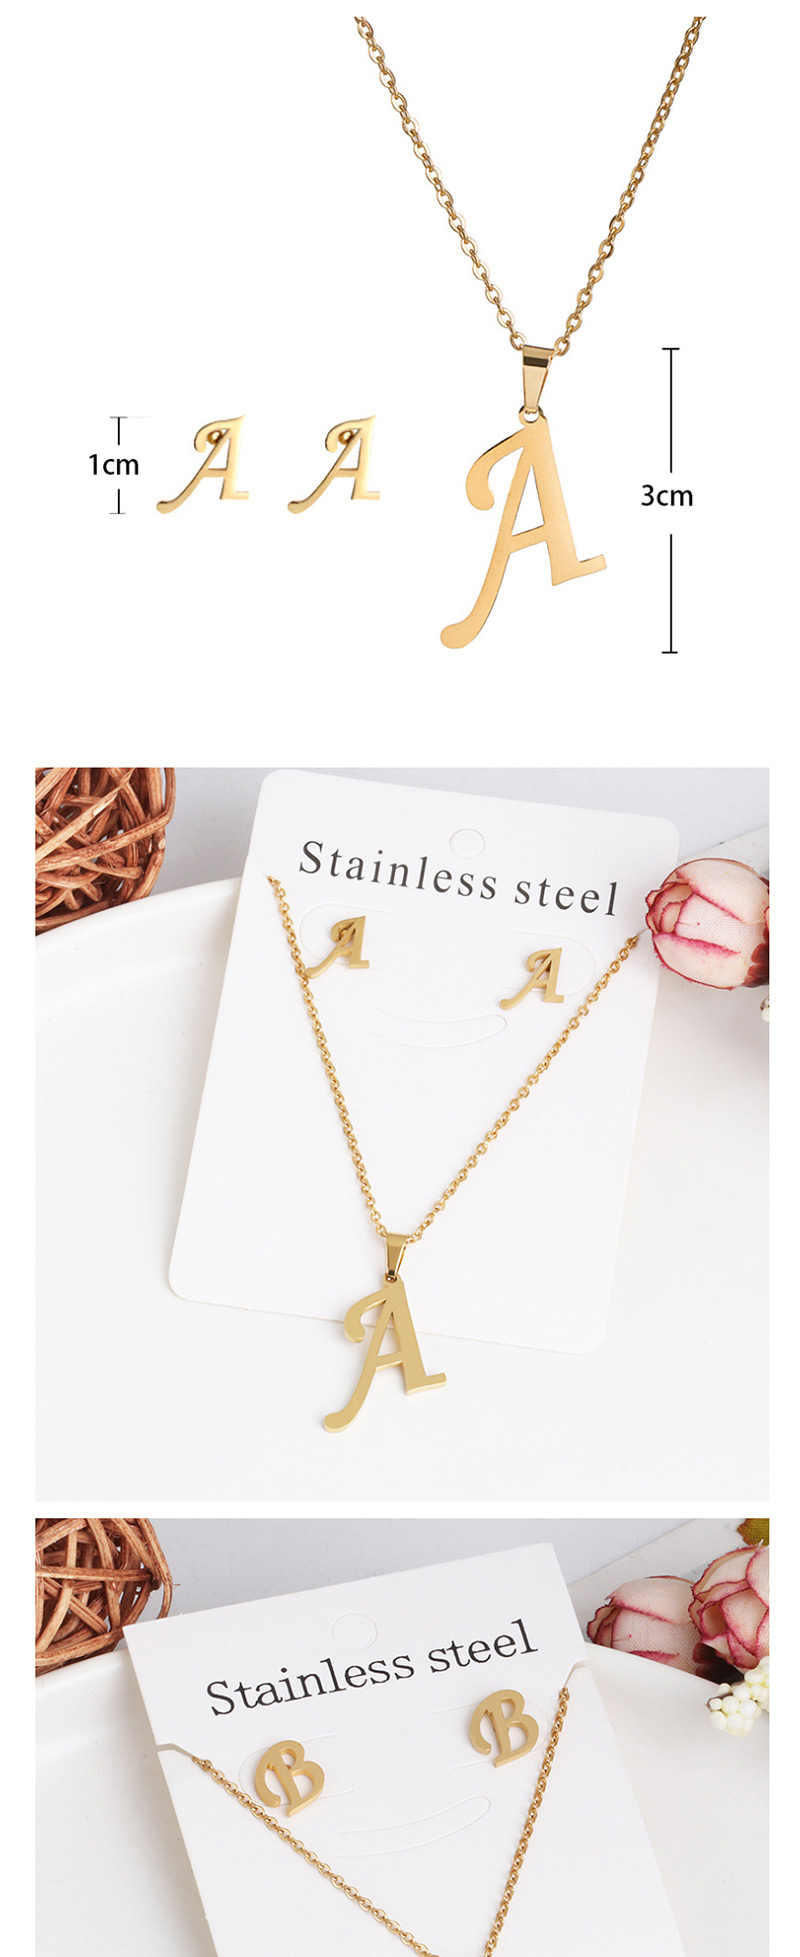 Fashion P Gold Stainless Steel Letter Necklace Earrings Two-piece,Jewelry Sets